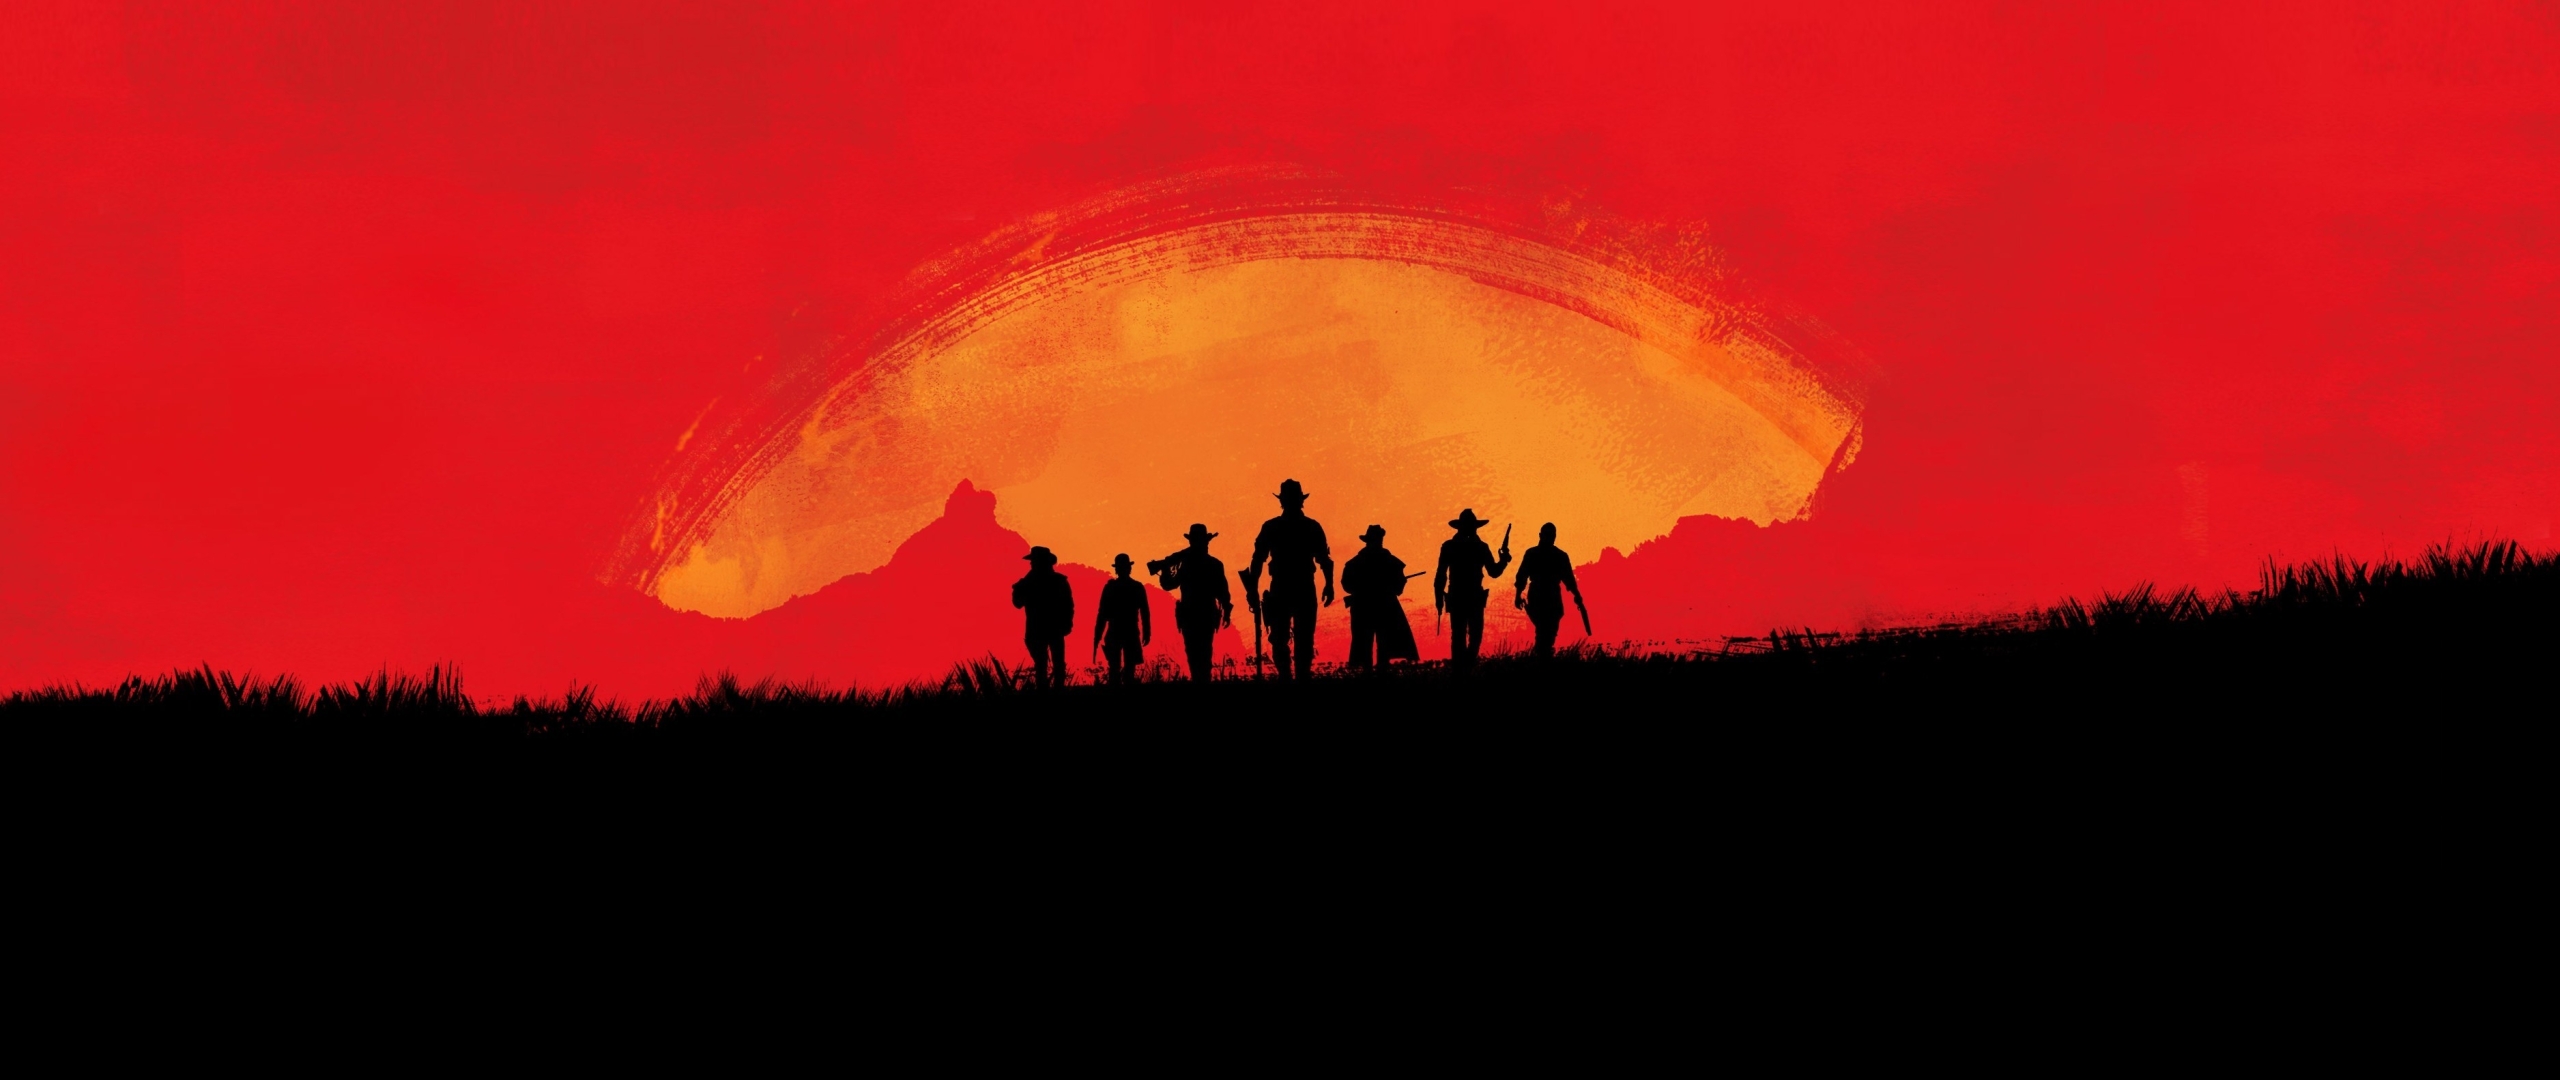 2560x1080 Red Dead Redemption 2 Video Game 2560x1080 Resolution Wallpaper Hd Games 4k Wallpapers Images Photos And Background Wallpapers Den